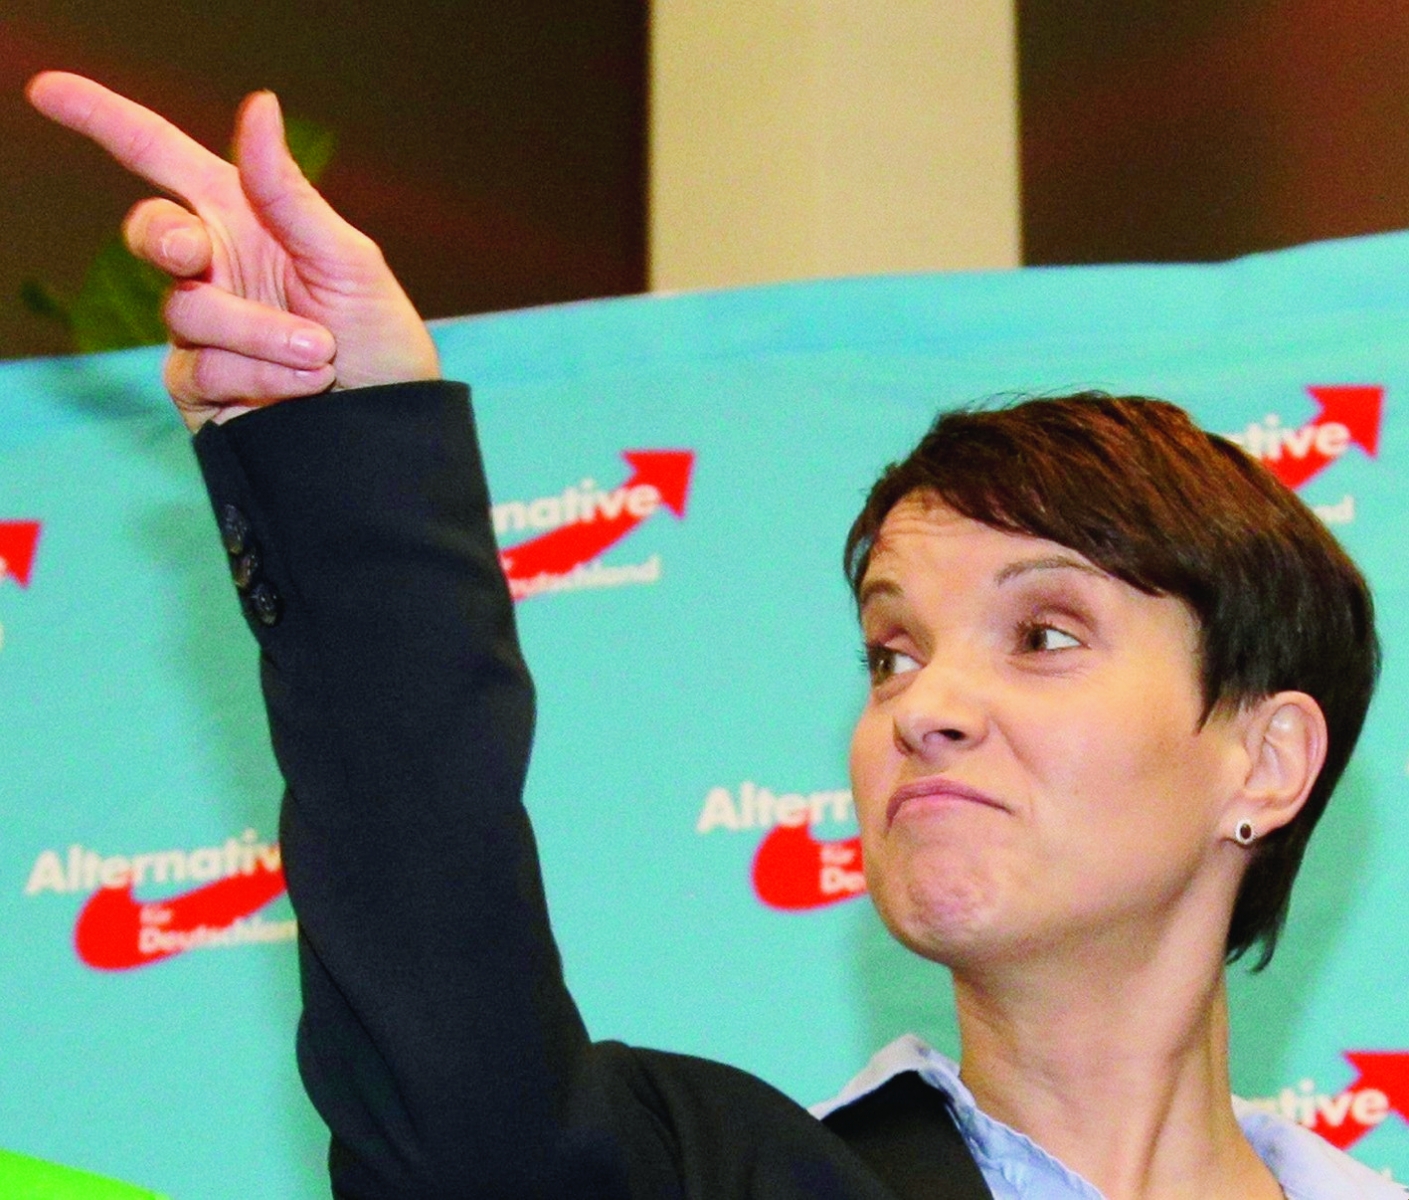 Frauke Petry, chairwoman of the AfD, points her finger at the gathering of the right-populist AfD (Alternative for Germany) after the closing of the state elections in the German federal states of Baden-Wuerttemberg, Rhineland-Palatinate and Saxony-Anhalt in Berlin, Germany, Sunday, March 13, 2016. Three German states were voting Sunday in the first significant political test since the country saw a massive influx of migrants. (AP Photo/Michael Sohn) APTOPX Germany Elections